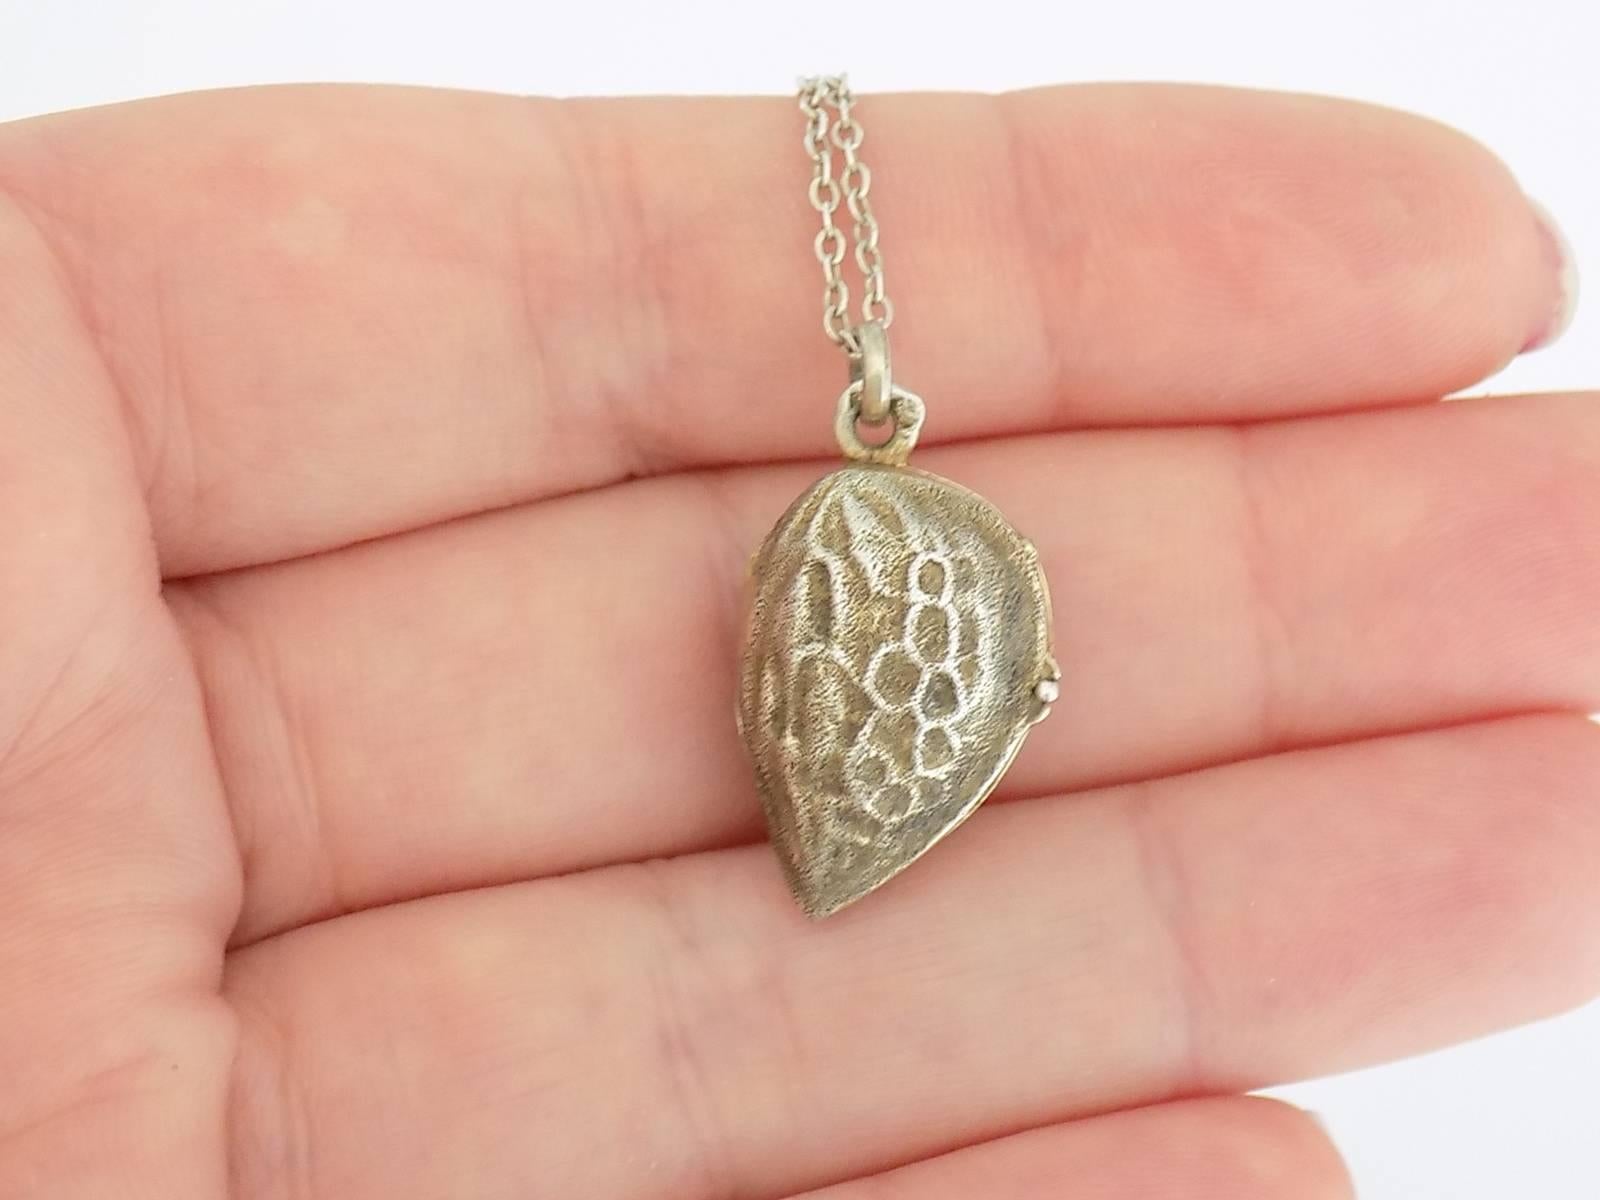 Antique Victorian Silver Almond Locket Pendant on Silver Chain Necklace 2